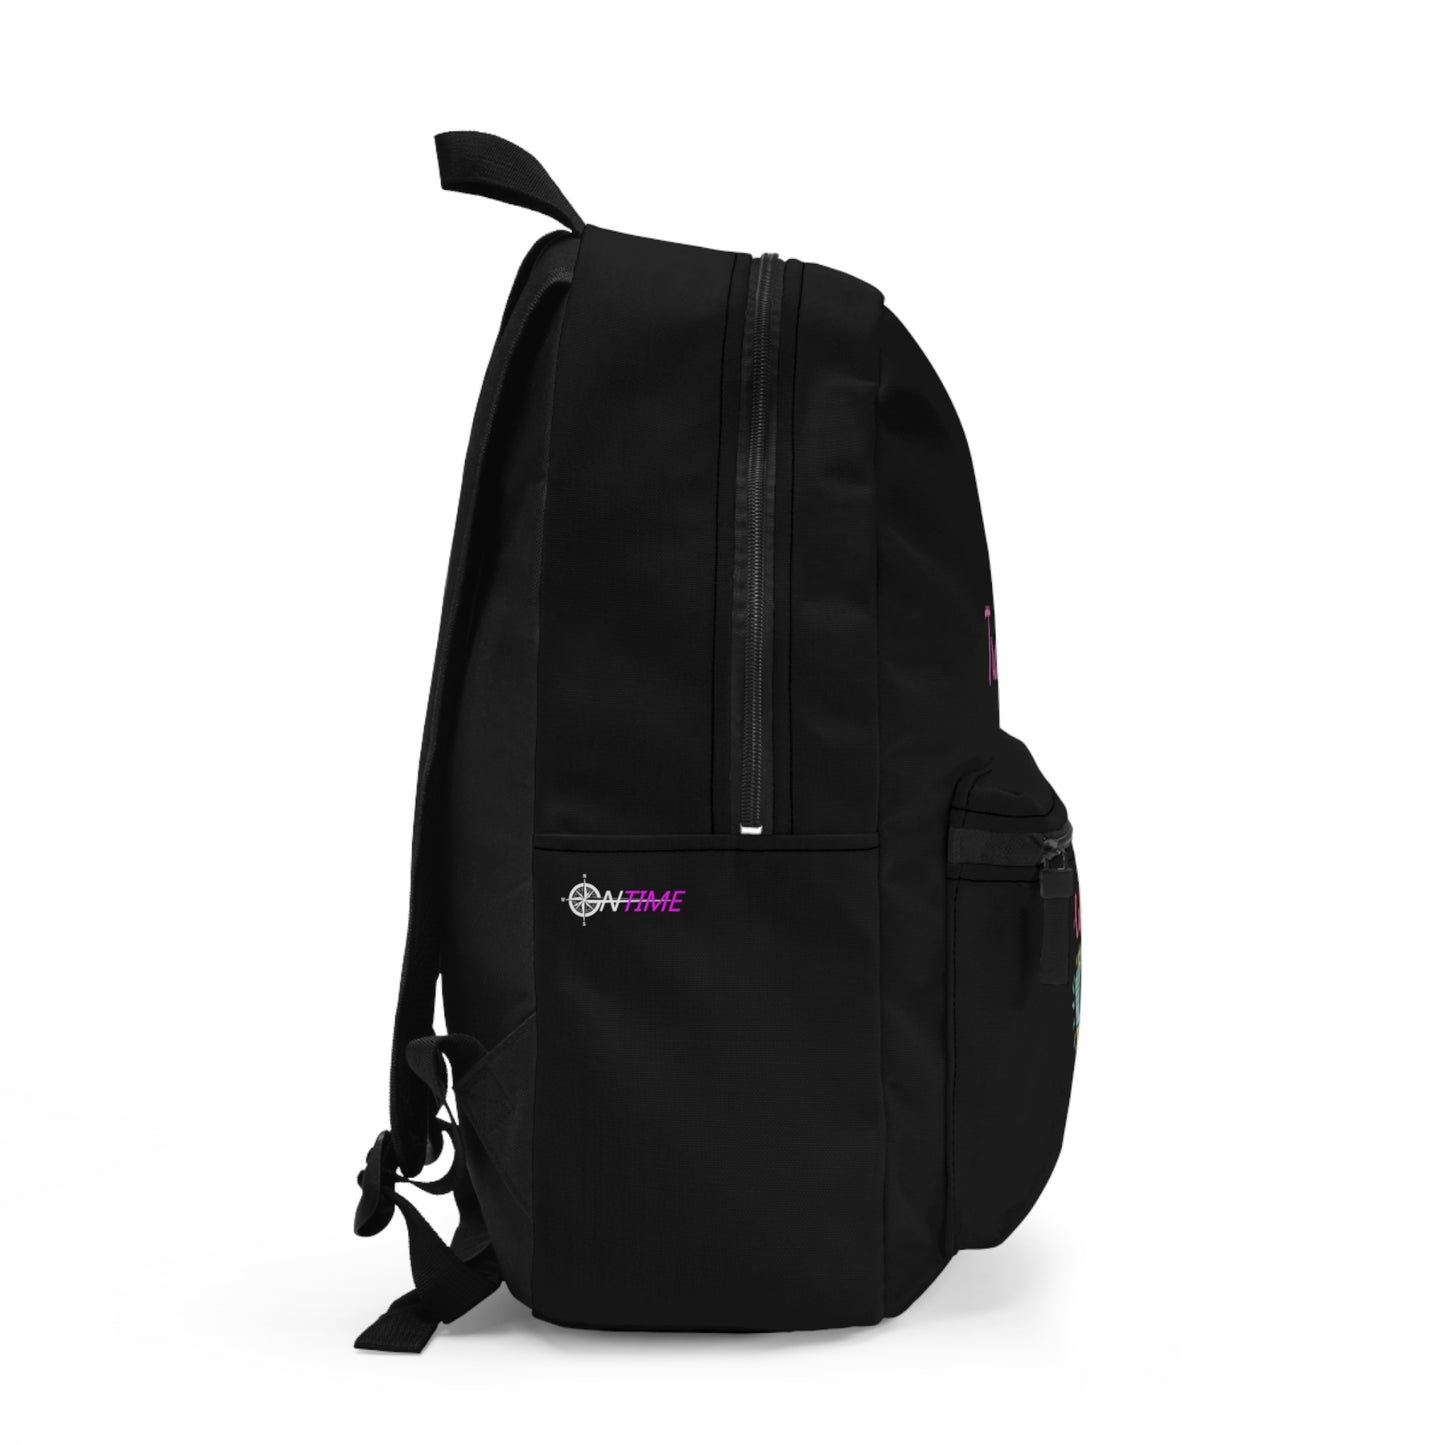 Copy of Collect Sweet Moments Backpack